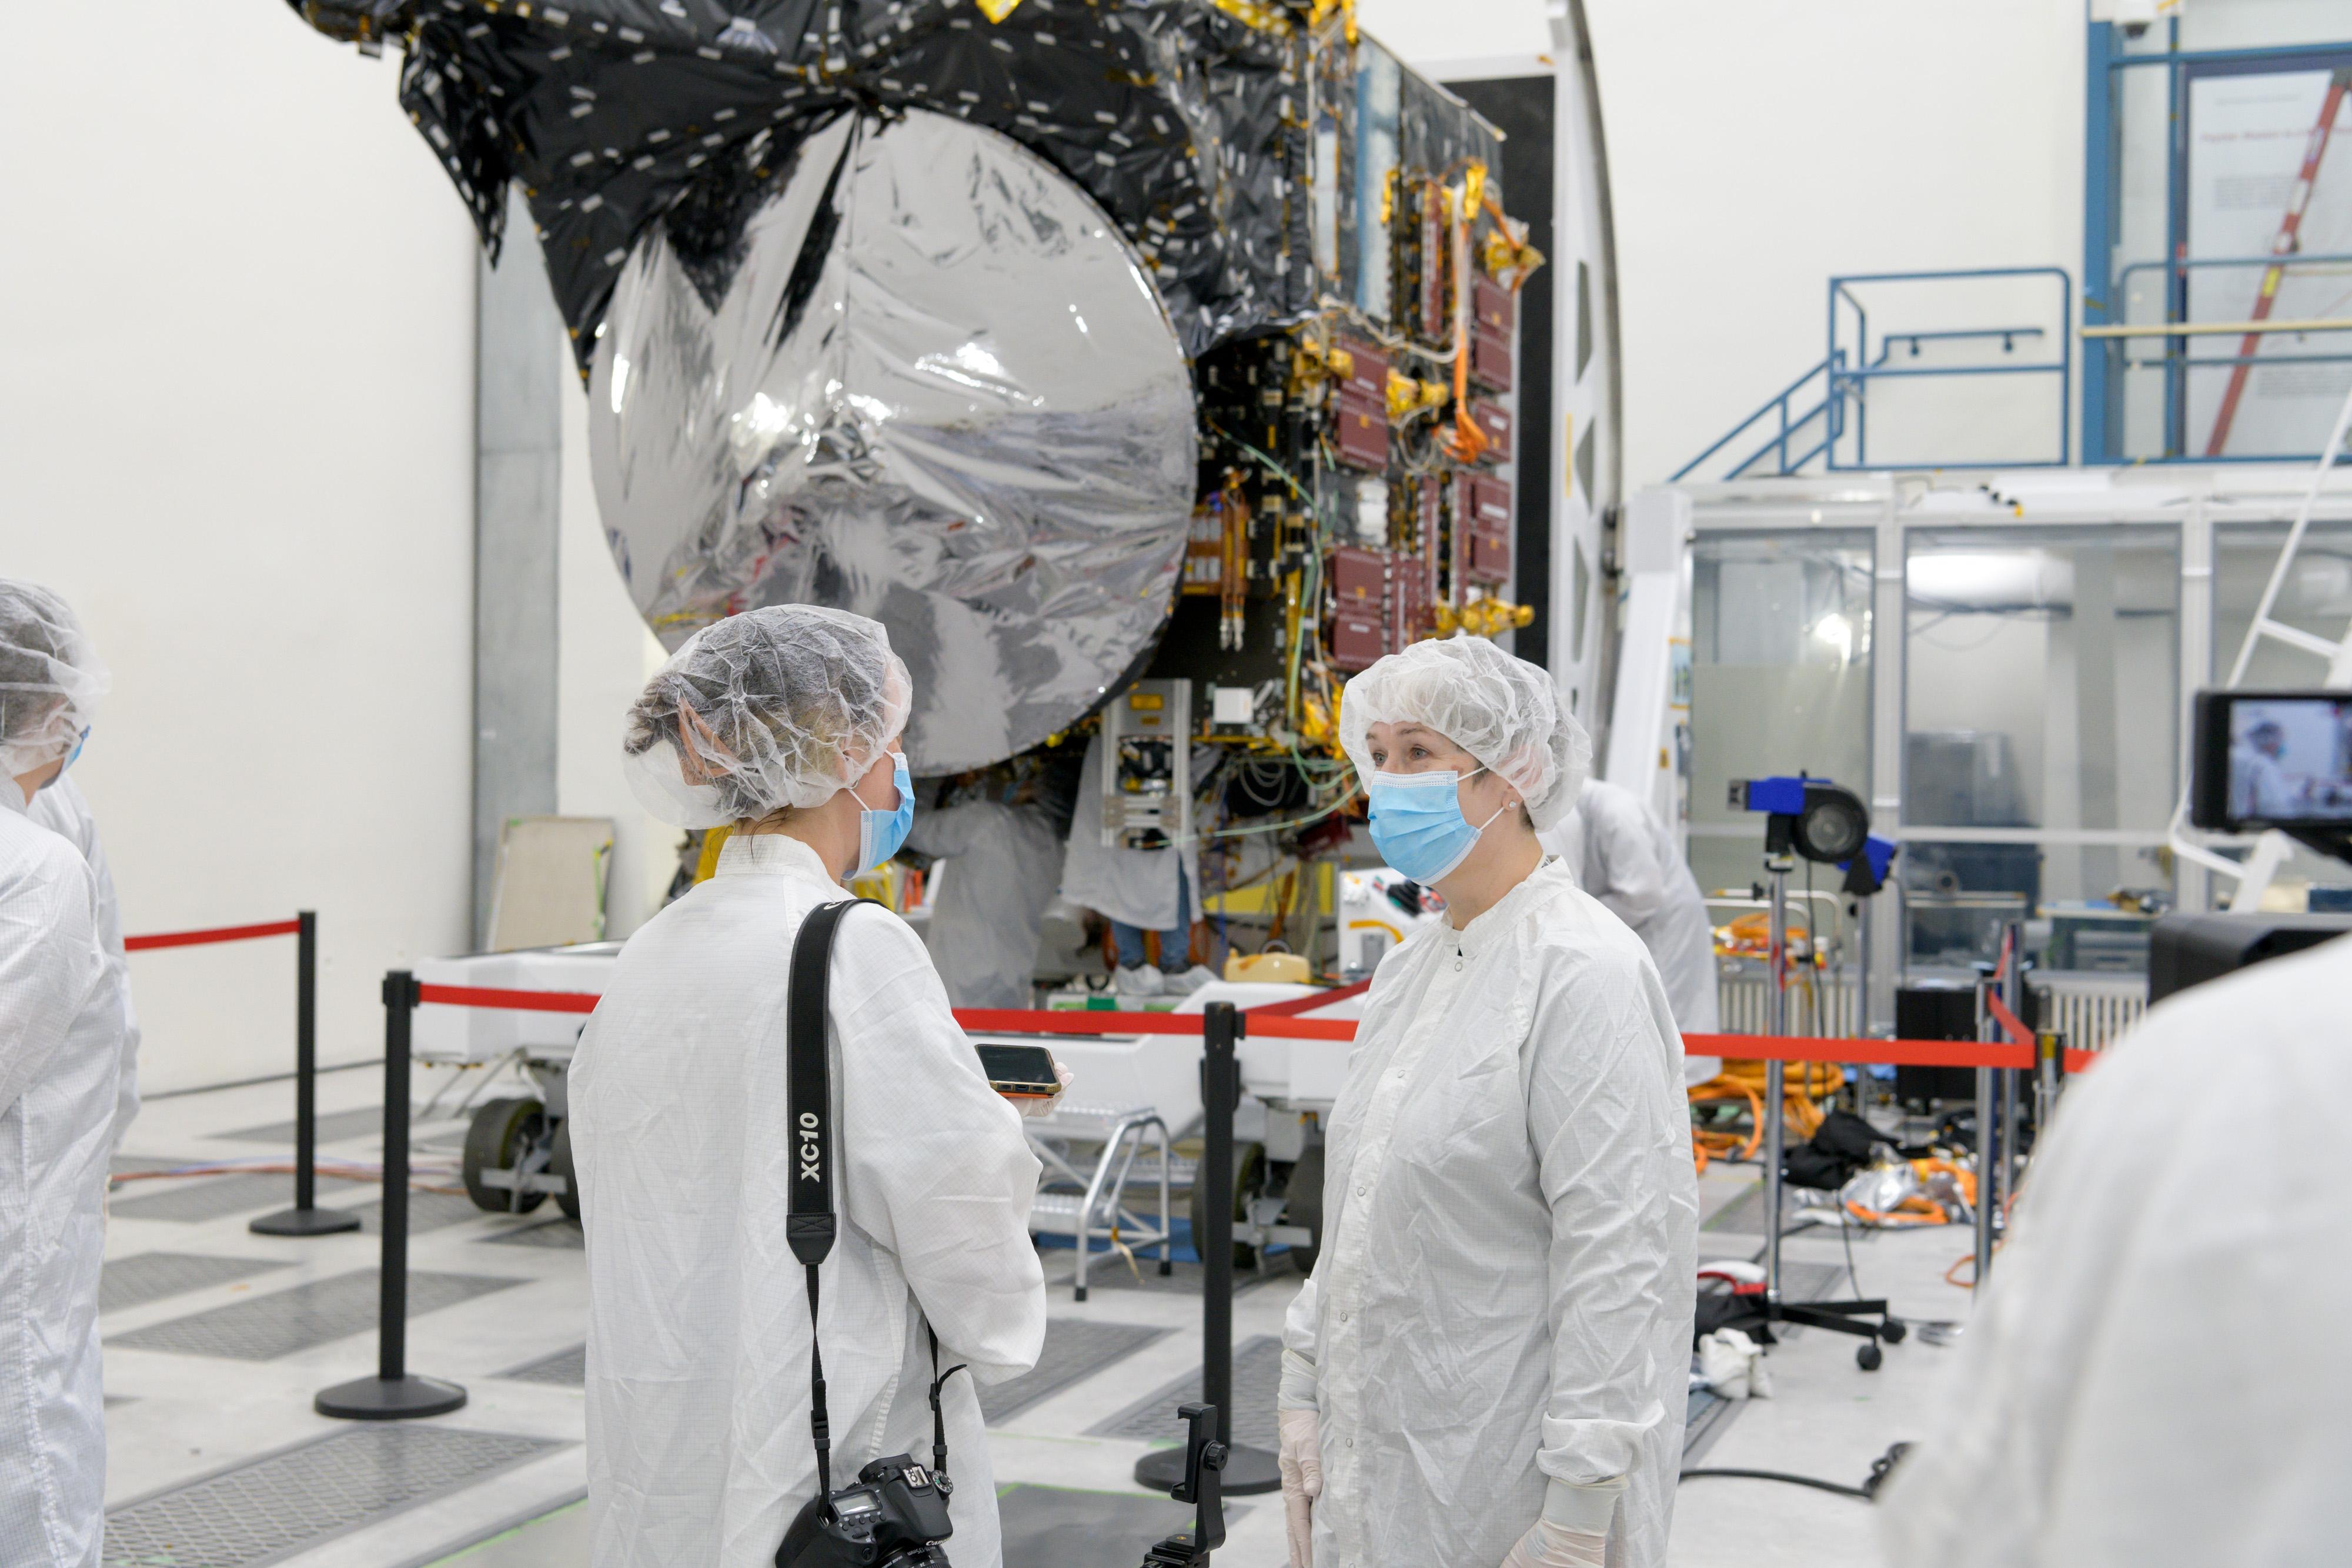 Two people dressed in white protective clothing and hair covers talk near the Psyche spacecraft.